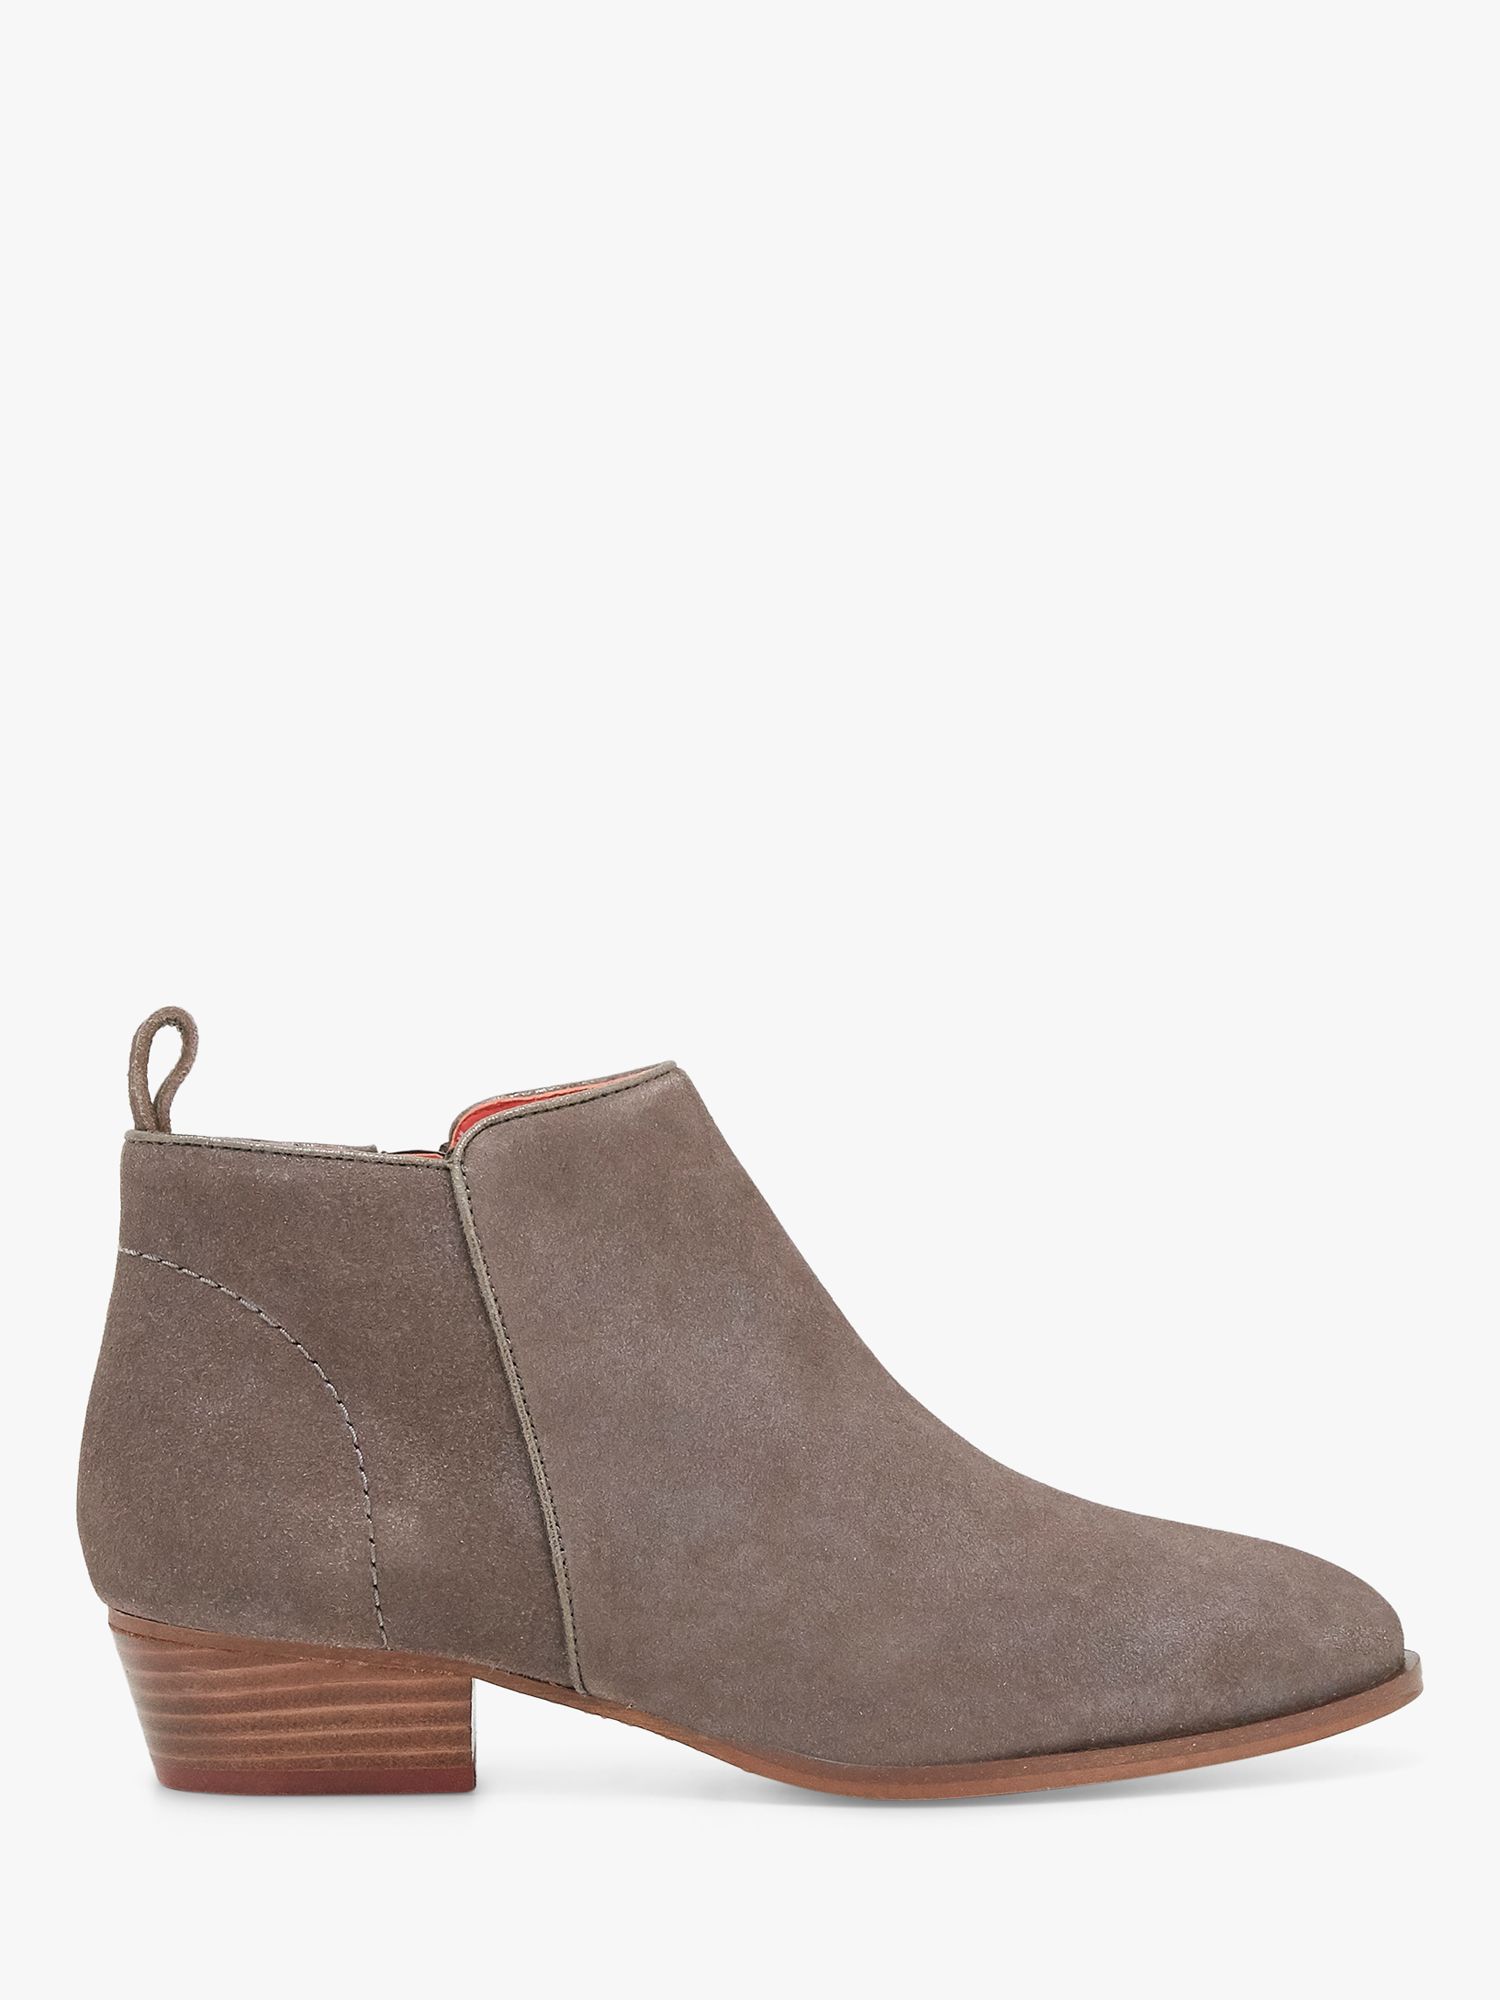 White Stuff Willow Suede Low Heel Ankle Boots, Dark Grey at John Lewis ...